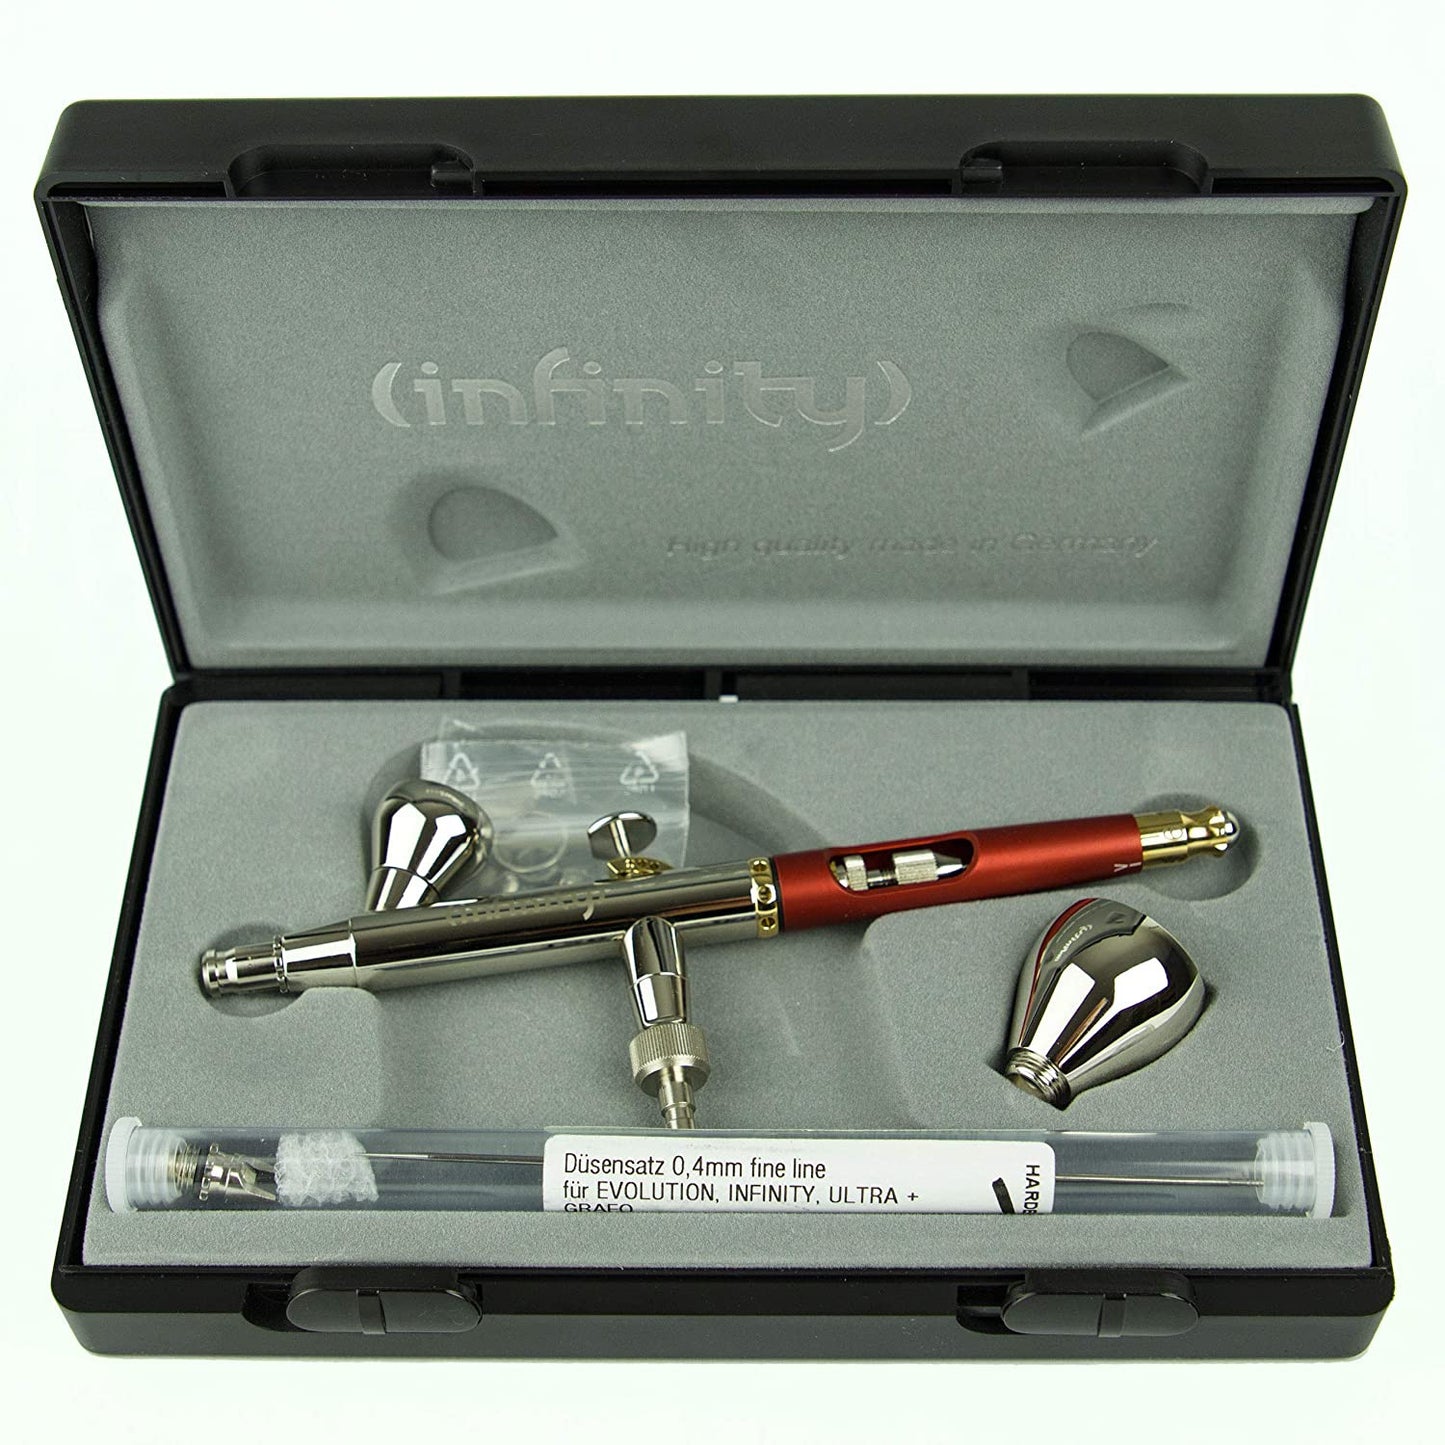 Harder & Steenbeck airbrush Infinity CR plus 2in 1 (0.15 & 0.4mm nozzle)